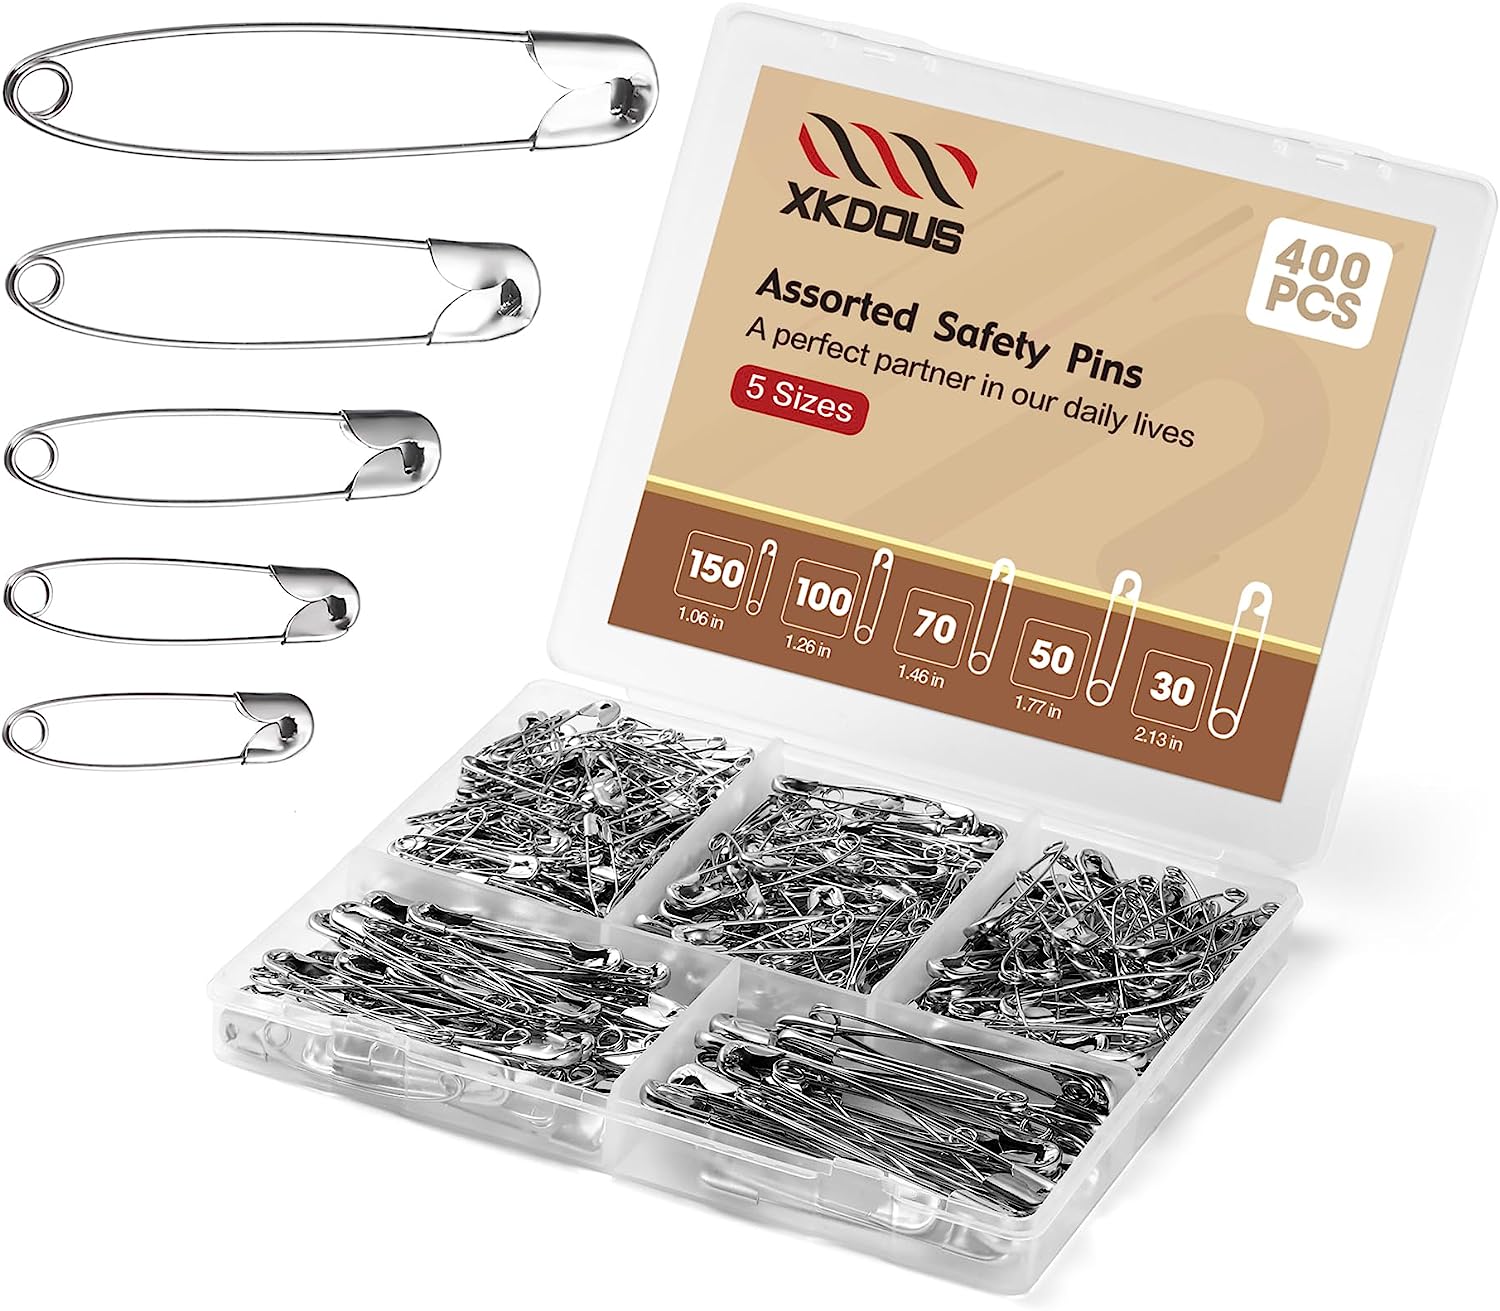 XKDOUS Safety Pins, 400 PCS Safety Pins Assorted, 5 [...]